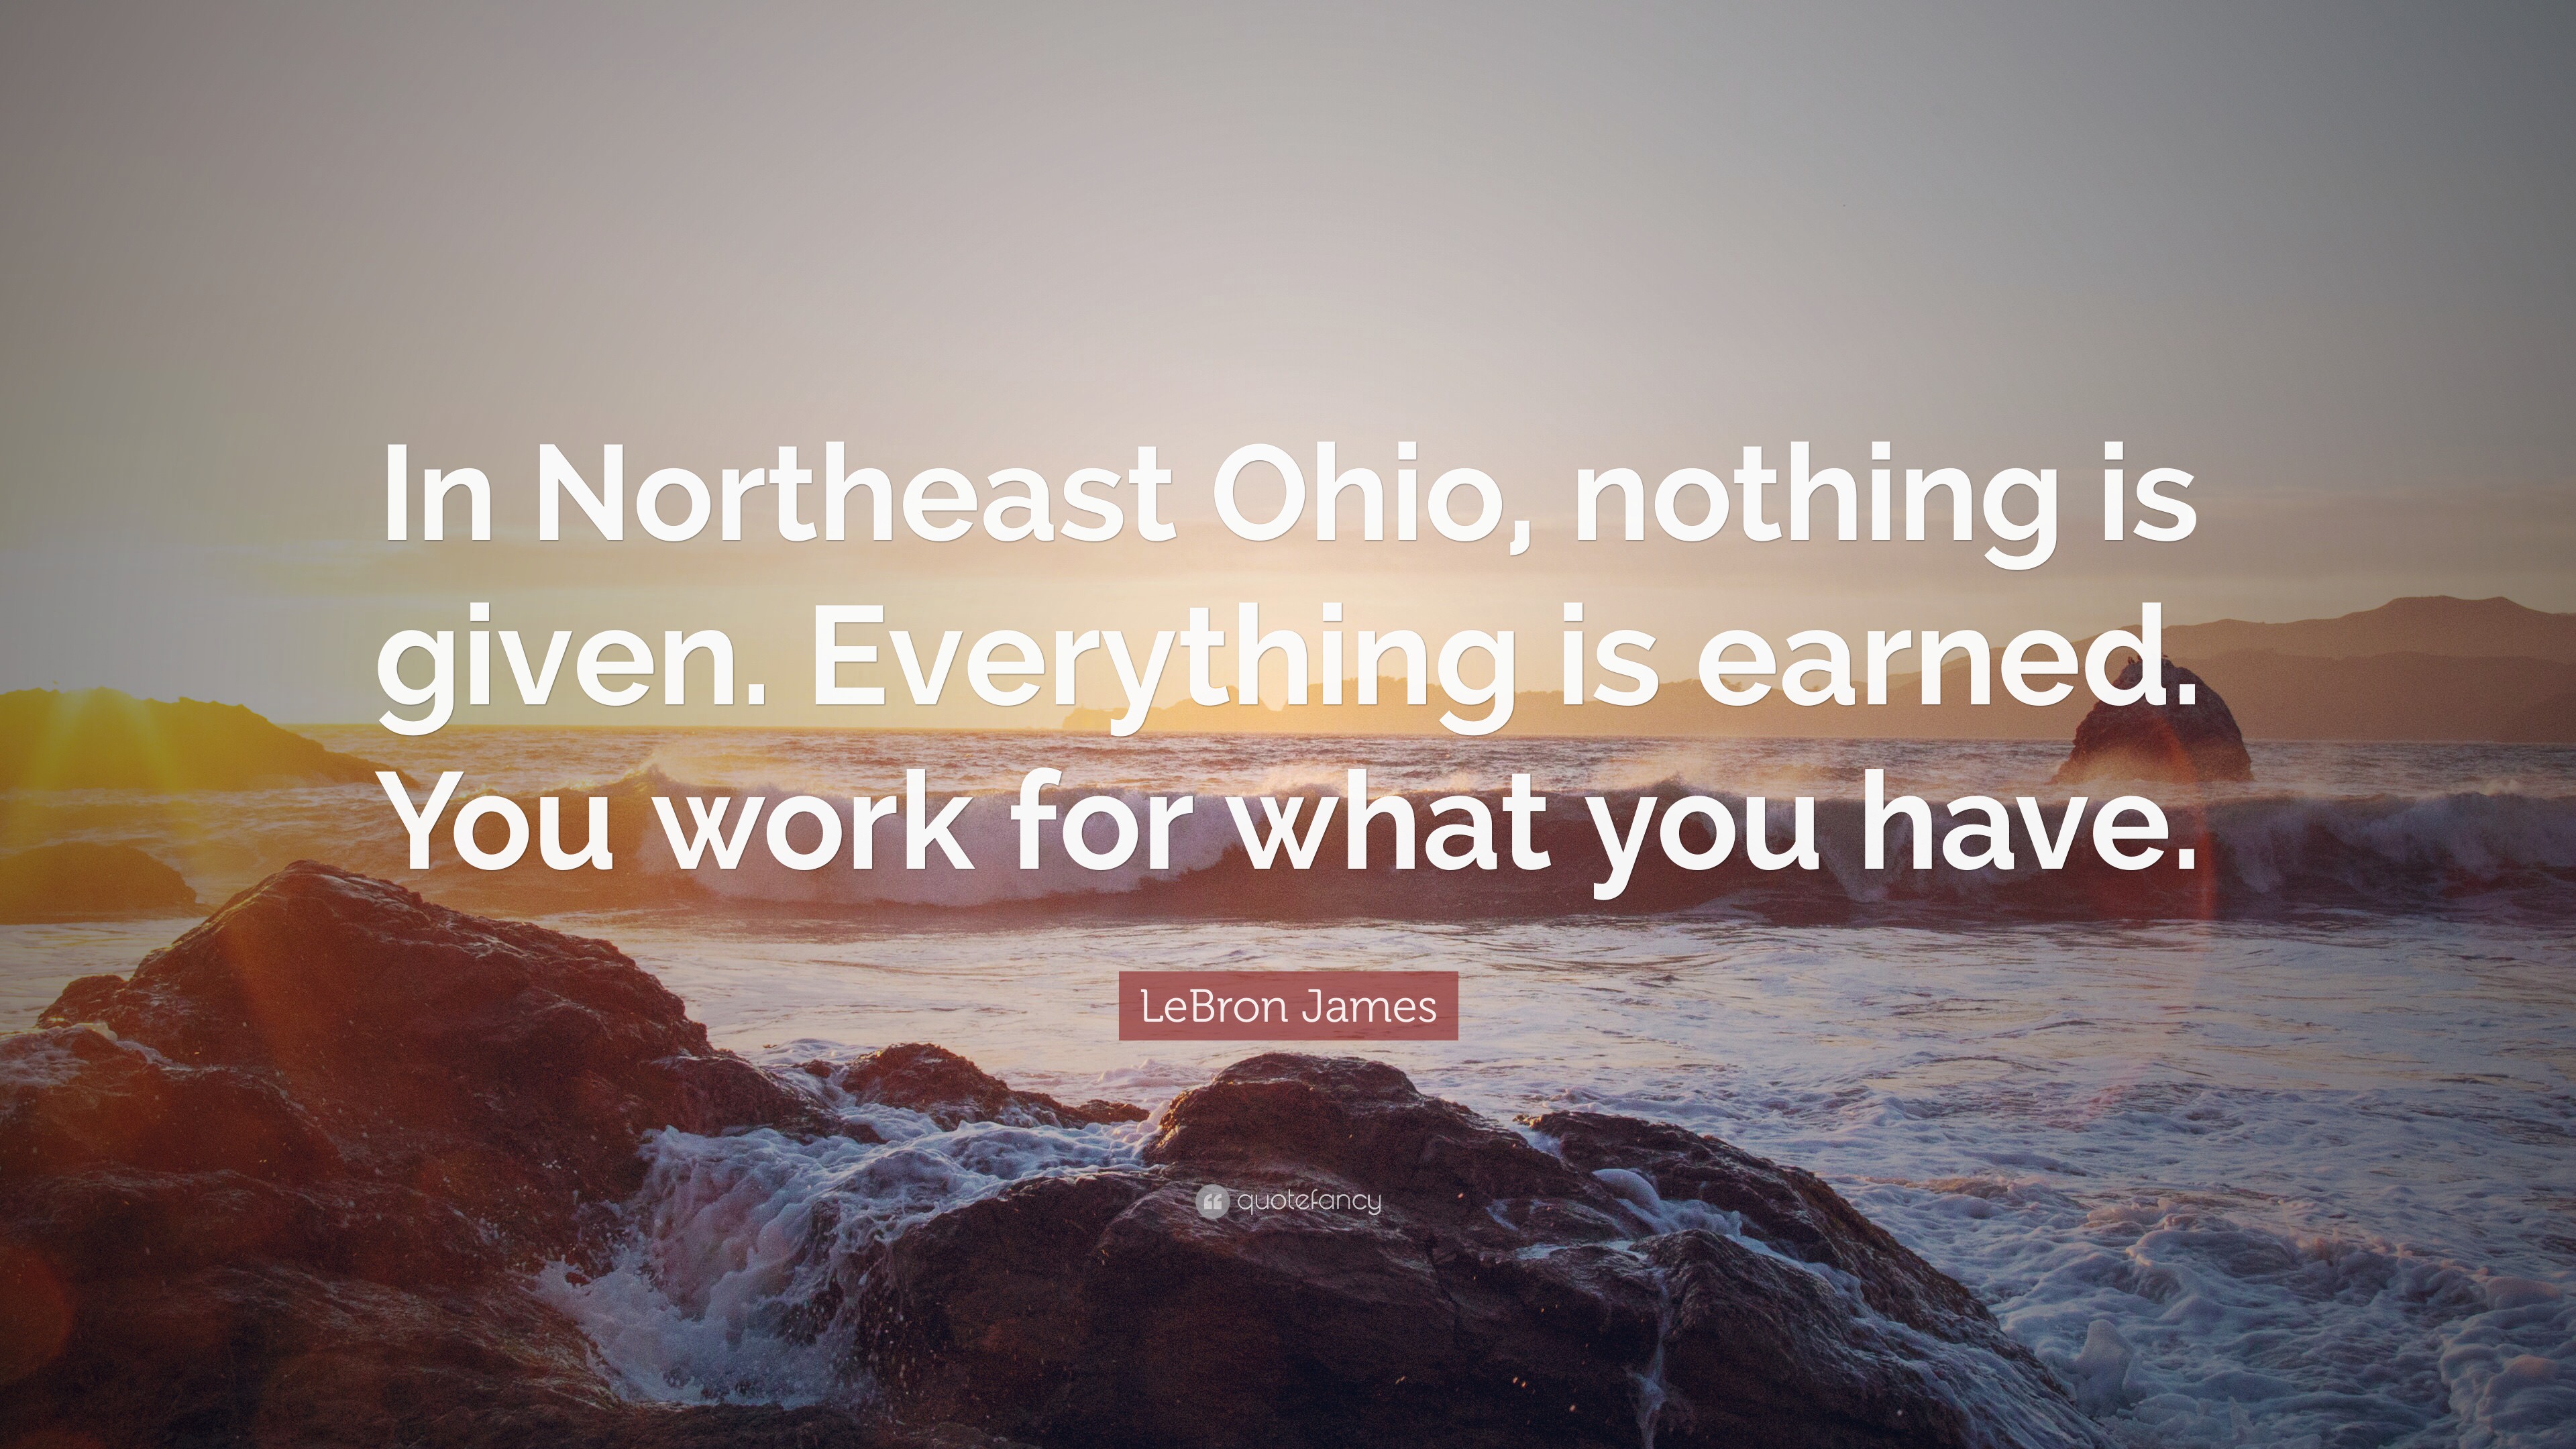 LeBron James Quote: “In Northeast Ohio, nothing is given. Everything is